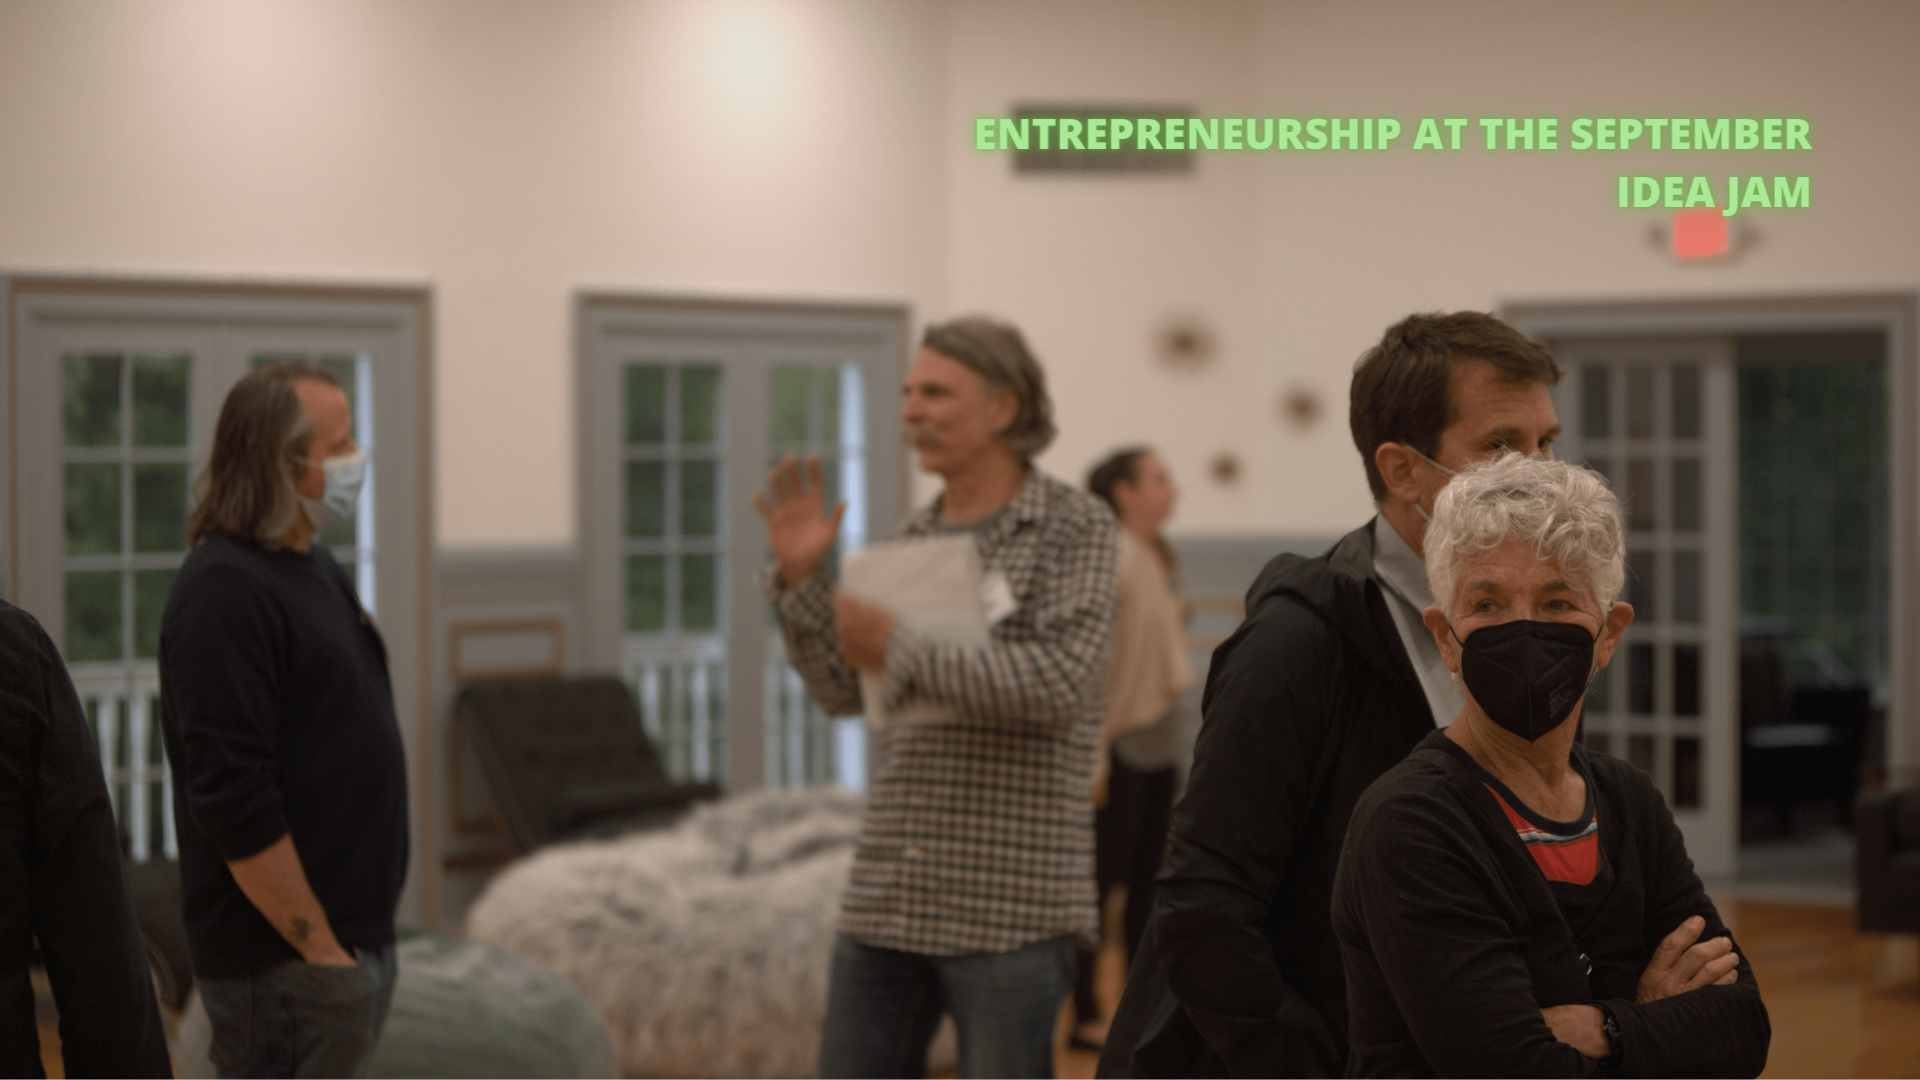 Community Energy And Entrepreneurship At The Vermont Innovation Box: Reflections From BDCC’s September Idea Jam